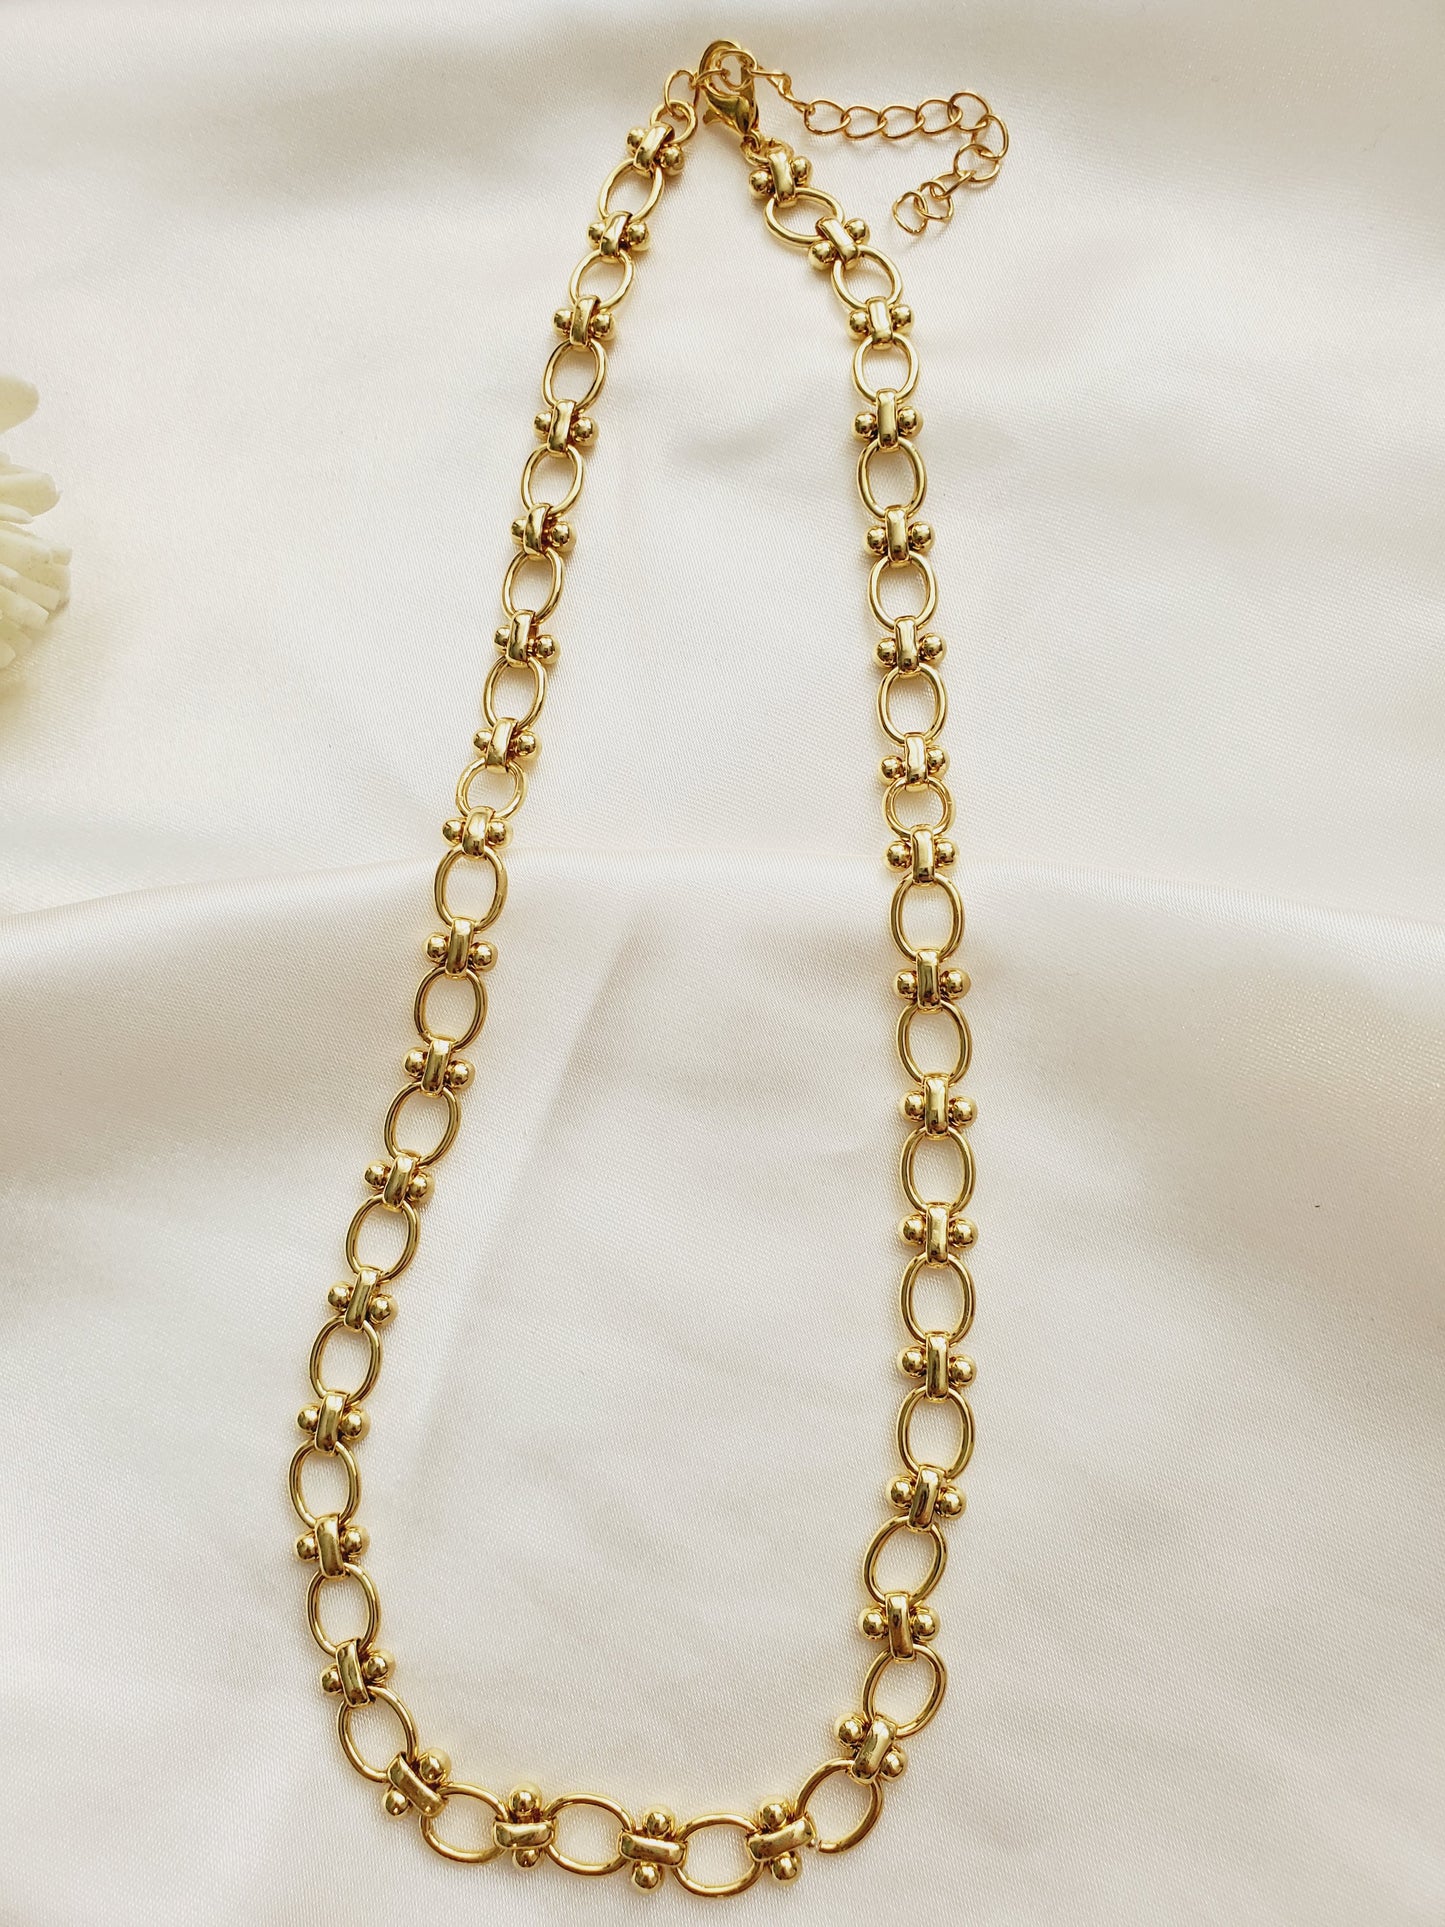 Gold Filled Necklaces, Vintage Necklace, Minimalist Jewelry, Hello Luxy, Fine Jewelry, Tik Tok Jewelry, Tik Tok Fashion, Best Gift for wife, Wife best gift, rope Chain, Chunky chain